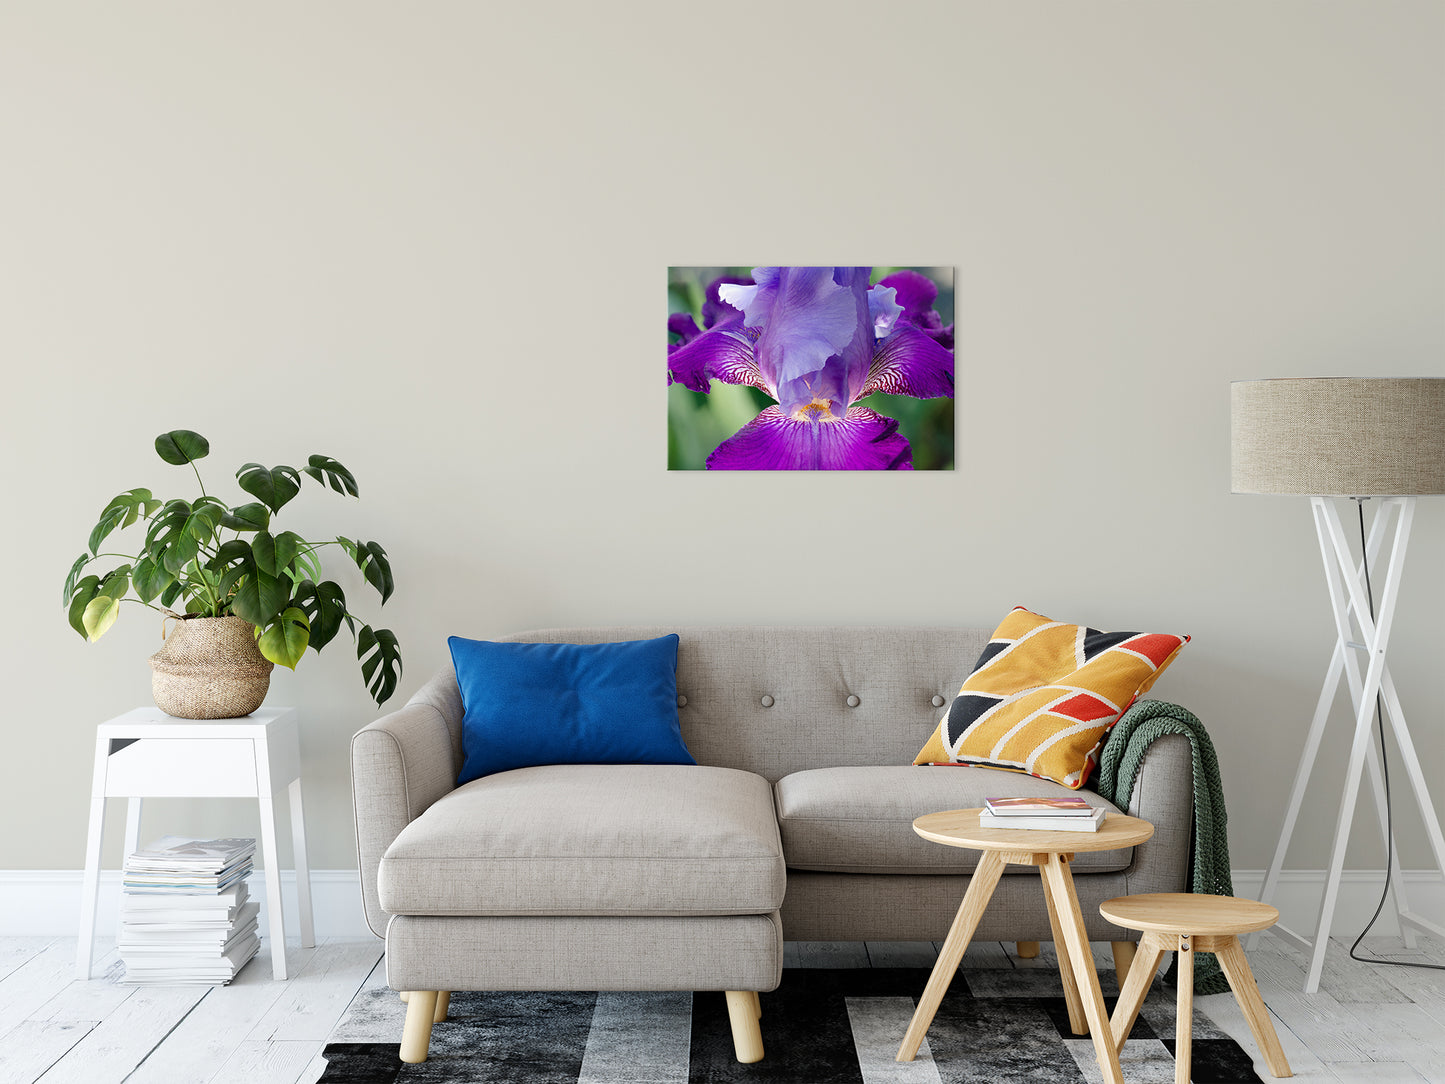 Large Wall Pictures For Bedroom: Glowing Iris Nature / Floral Photo Fine Art Canvas Wall Art Prints 20" x 30" - PIPAFINEART